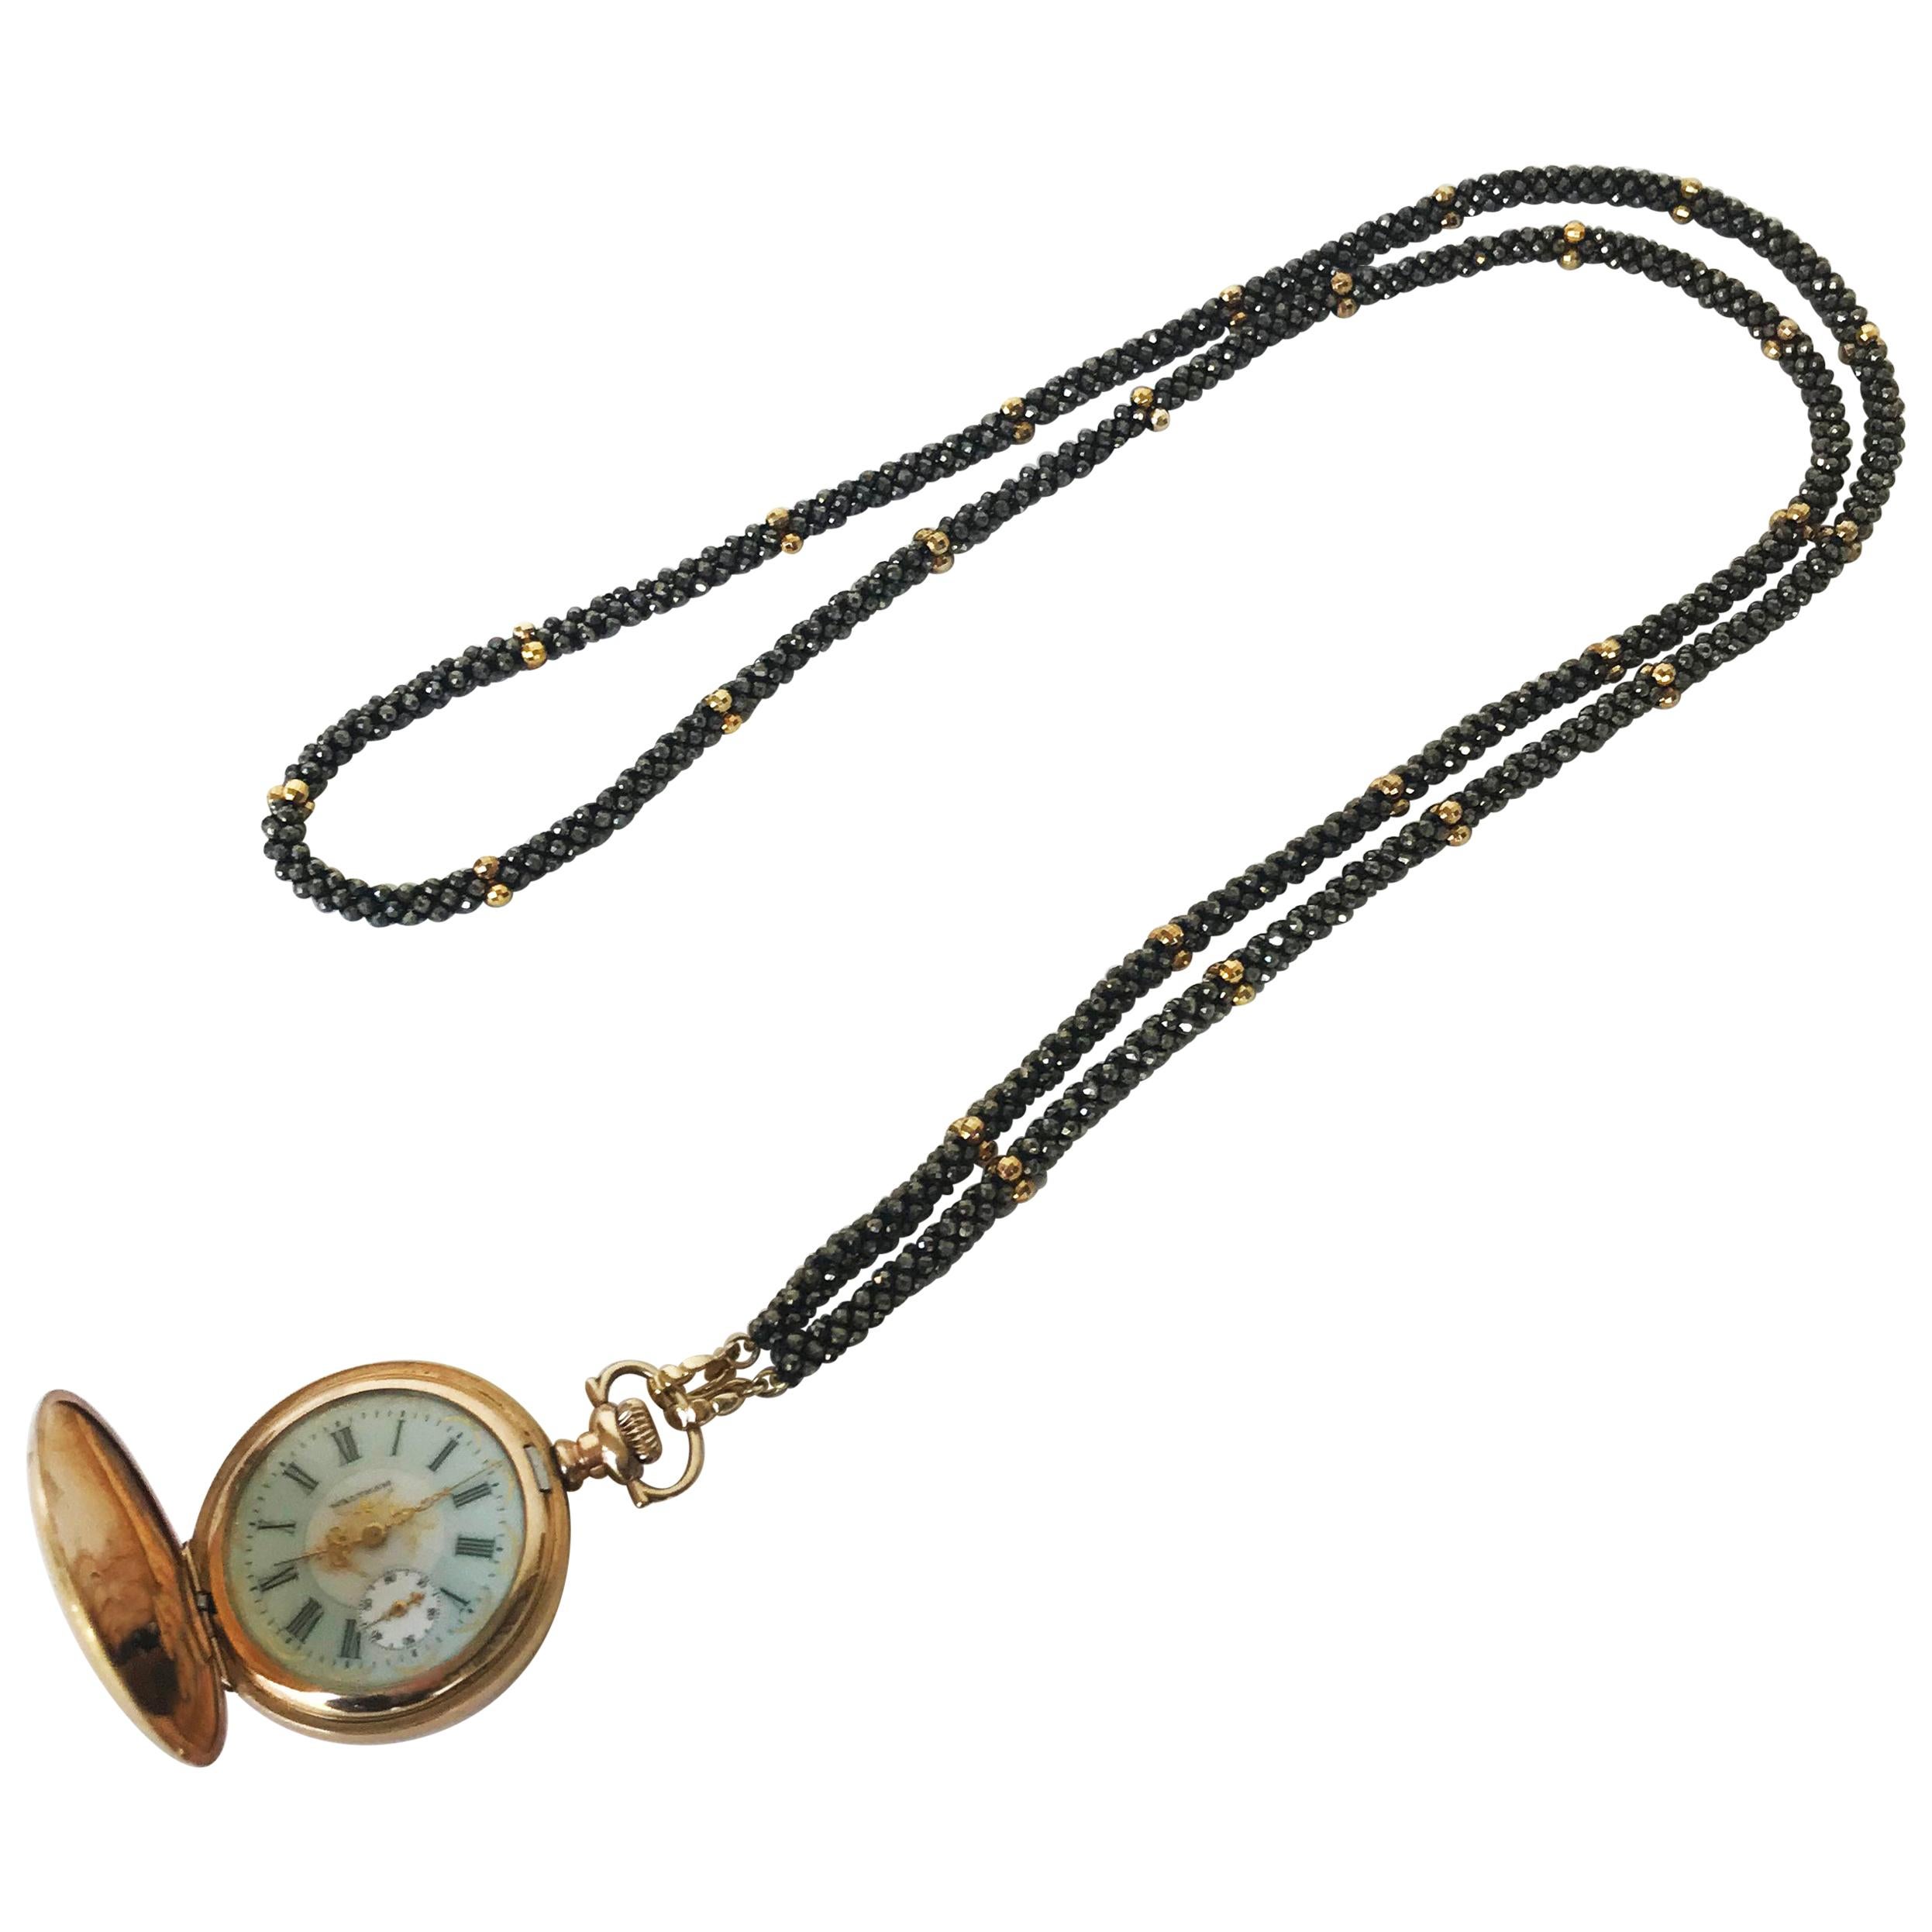 Marina J Black Spinel Woven Rope Necklace with Vintage Watch & 14K Gold Clasp